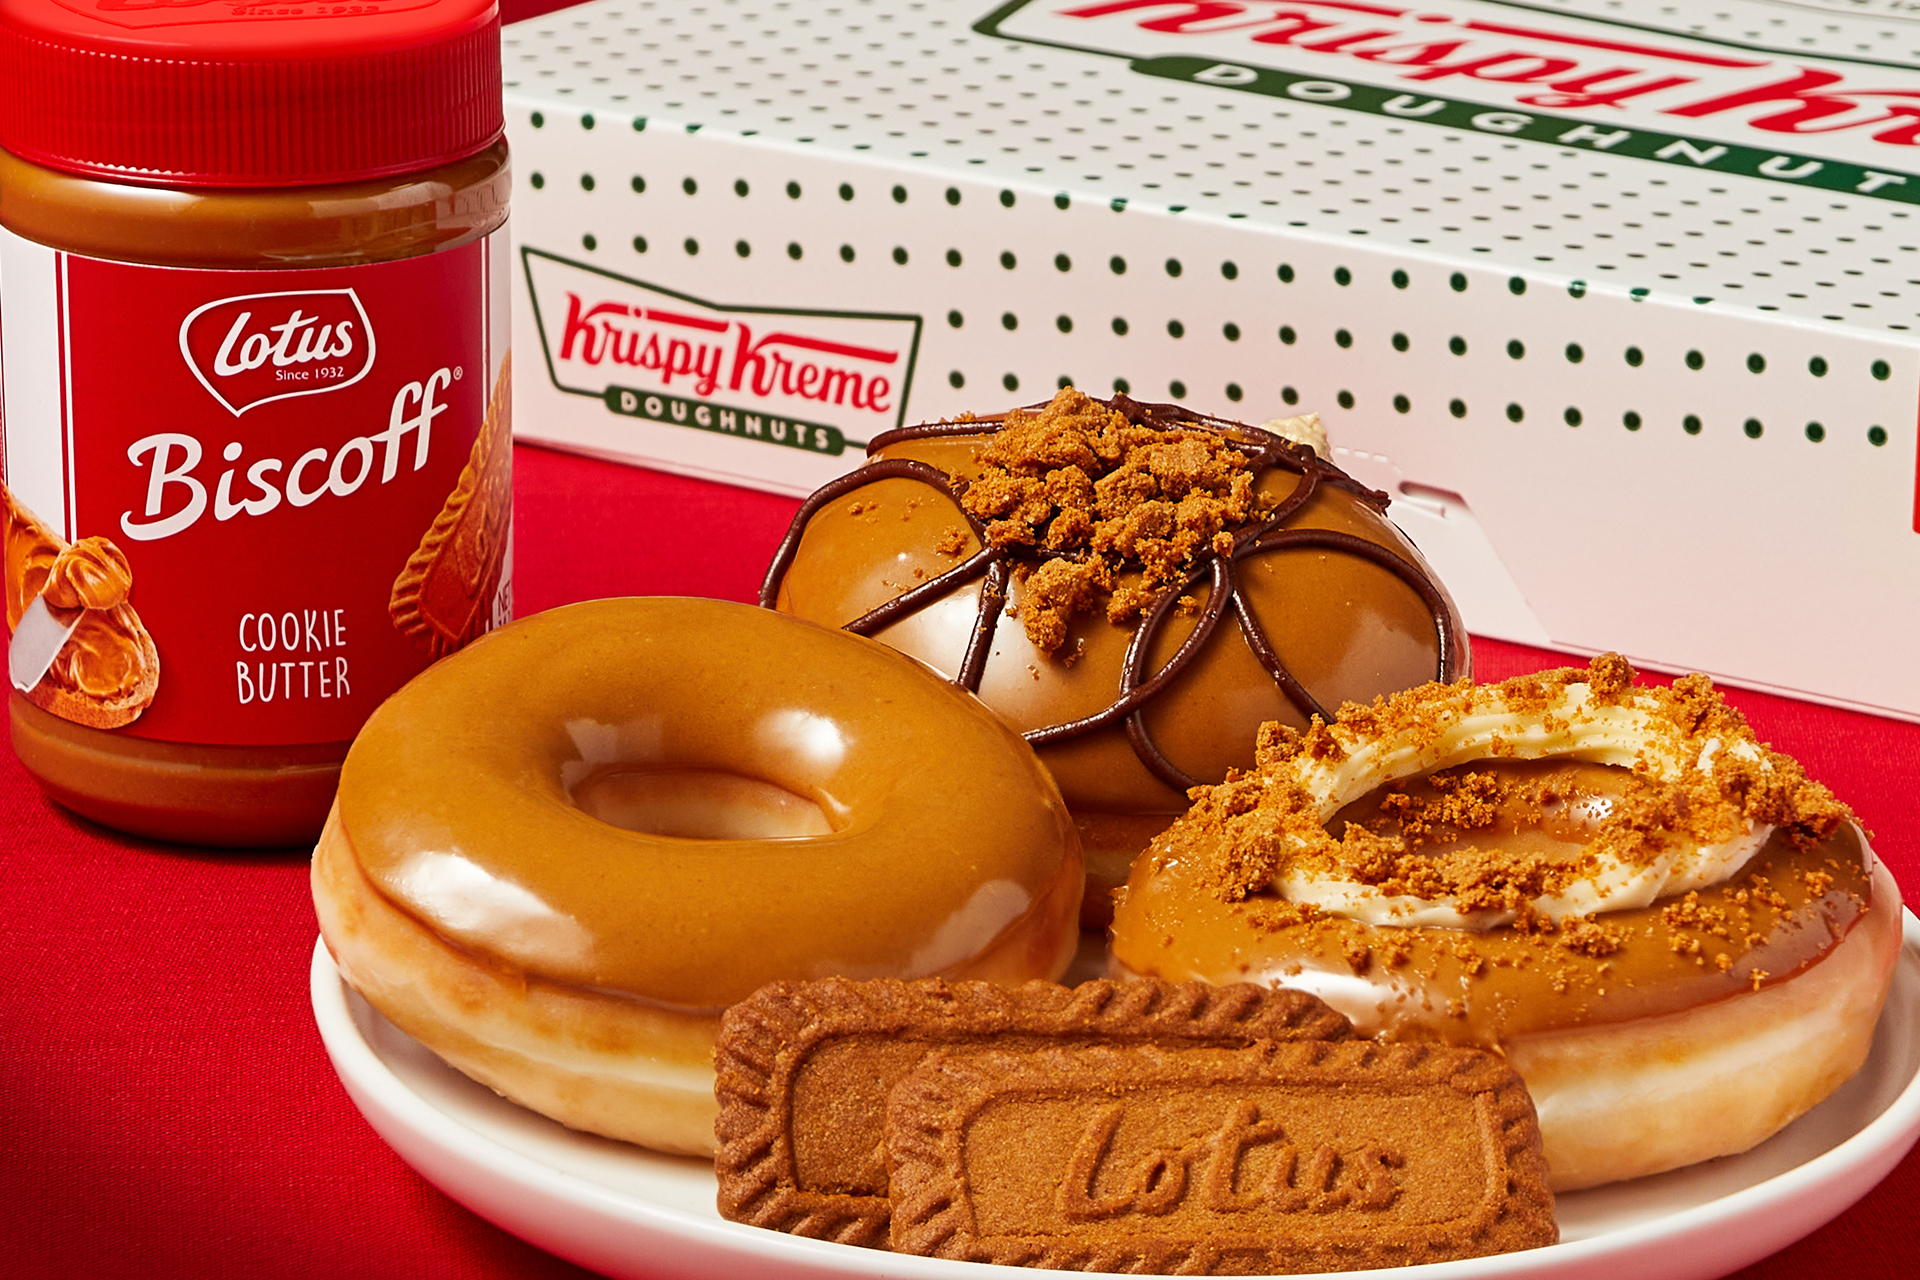 PHOTO: Three new doughnuts made with Biscoff cookie butter at Krispy Kreme.